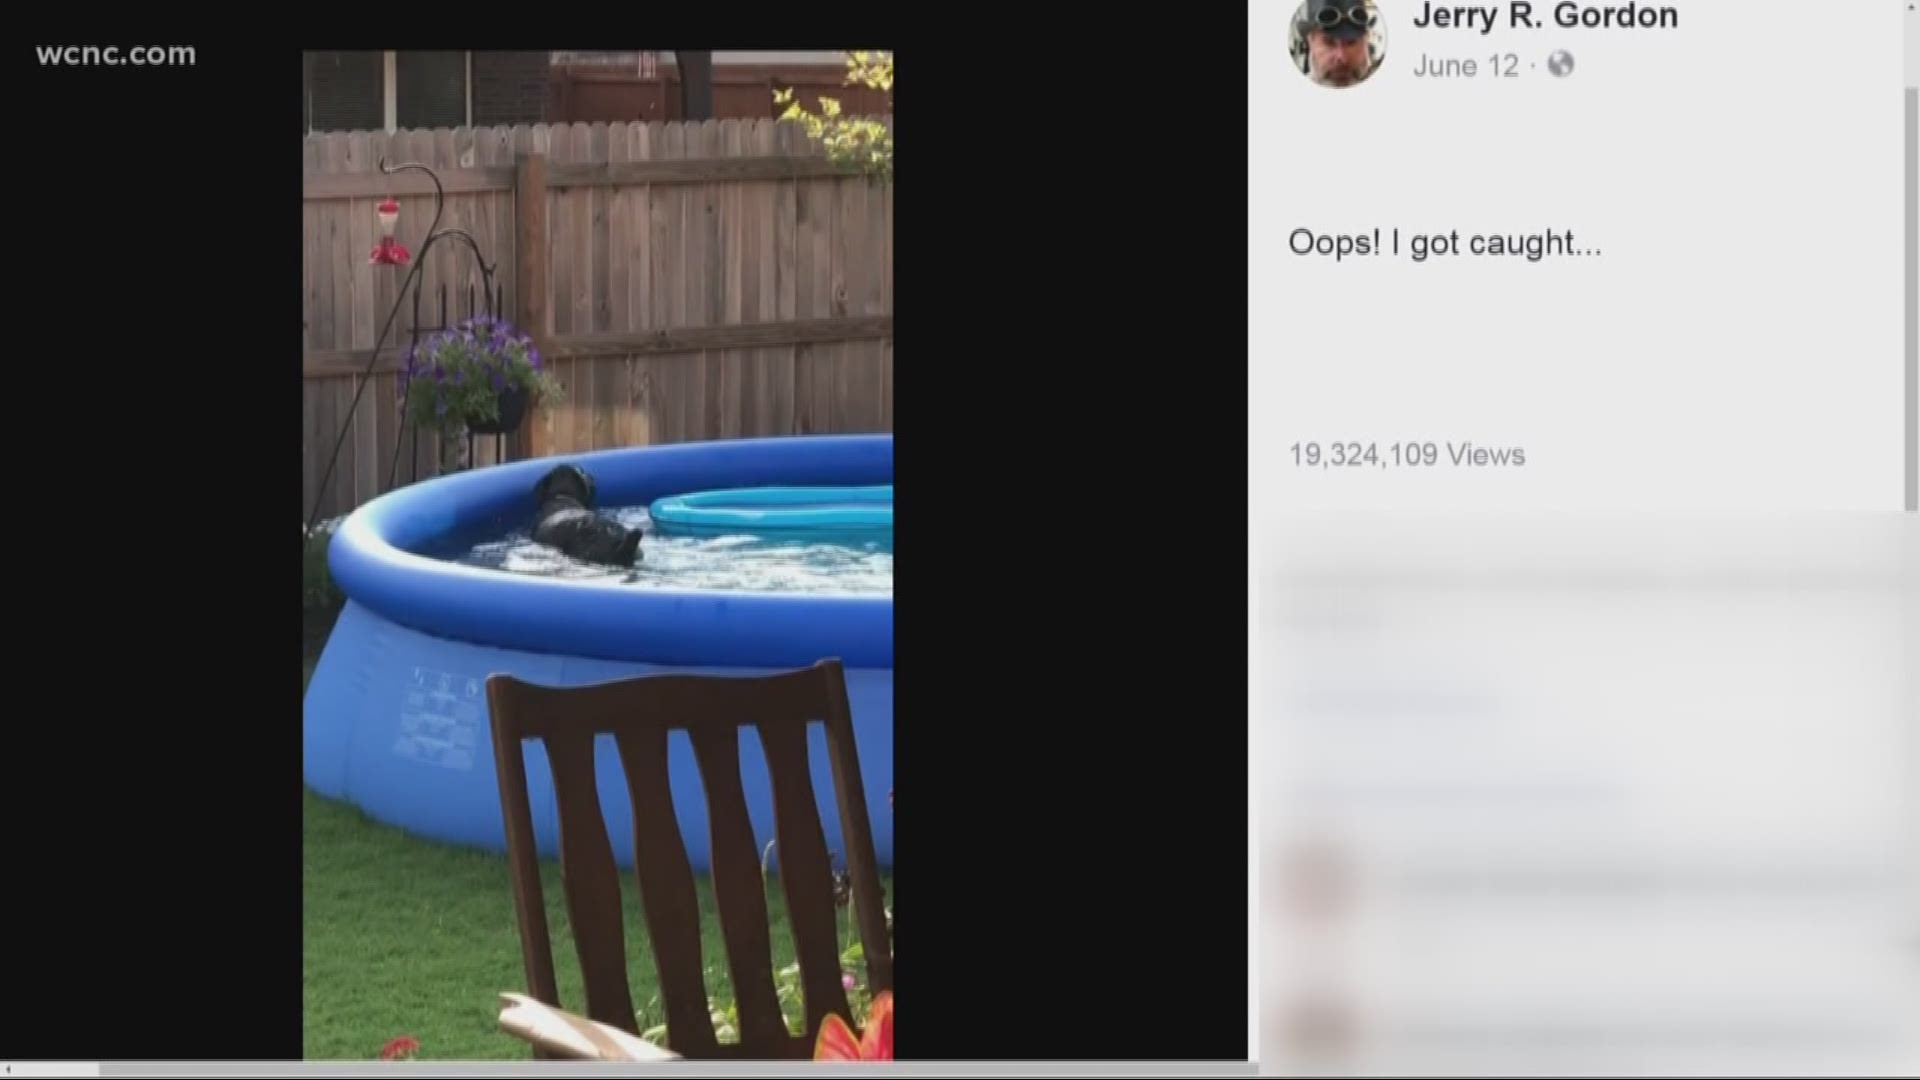 A dog named Baxter is going viral after his summer swim got caught by his owner.